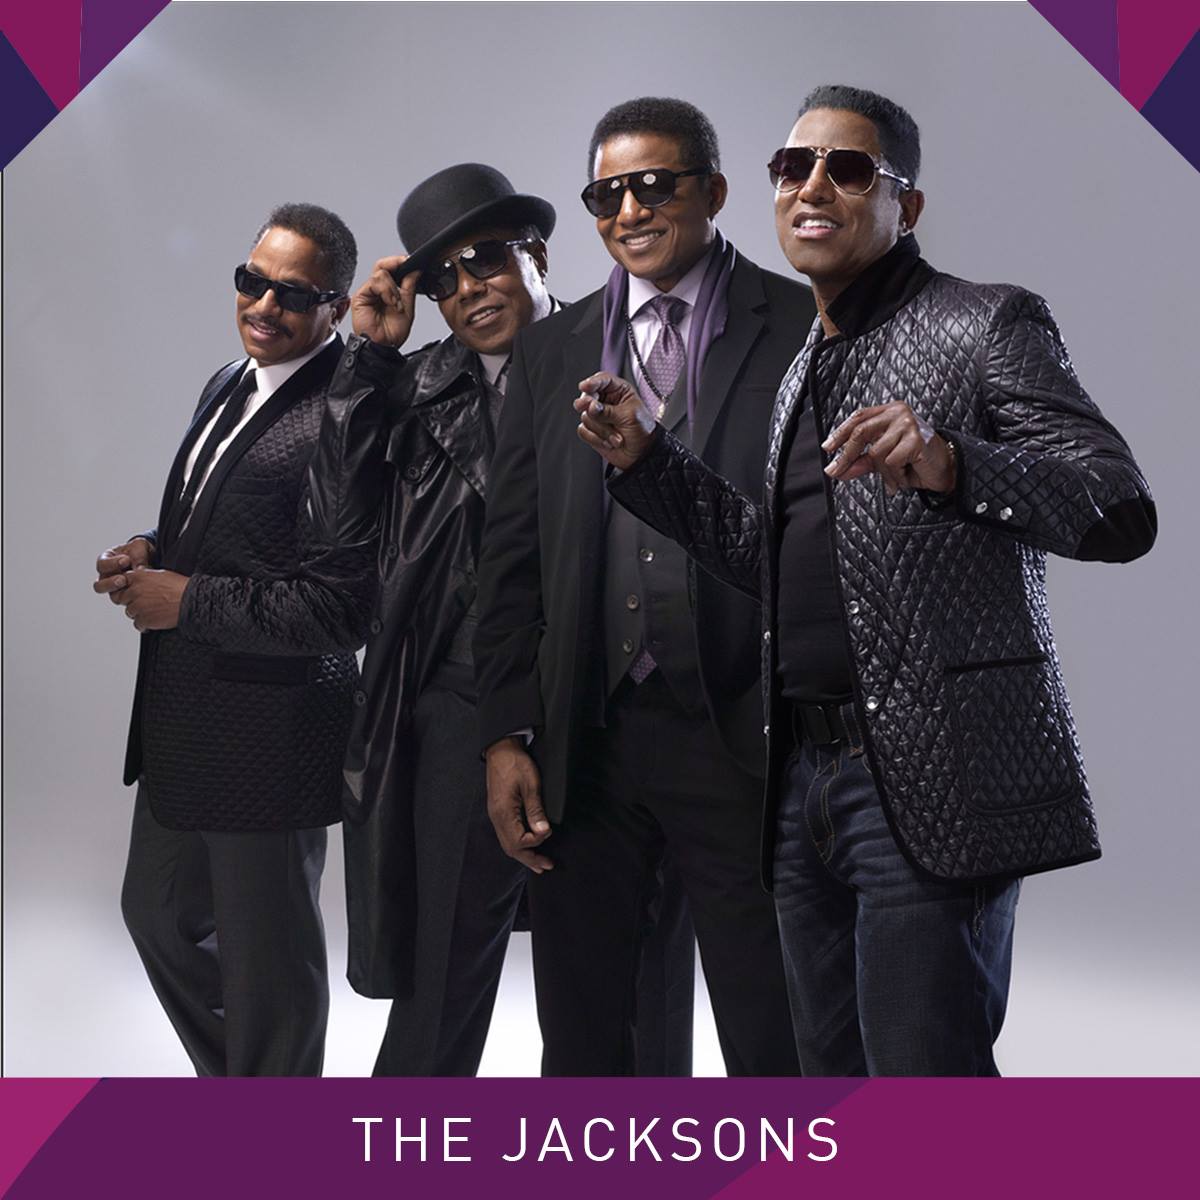 Don't miss Jackie, Tito, Jermaine and Marlon as they make their Hampton Court Pa...